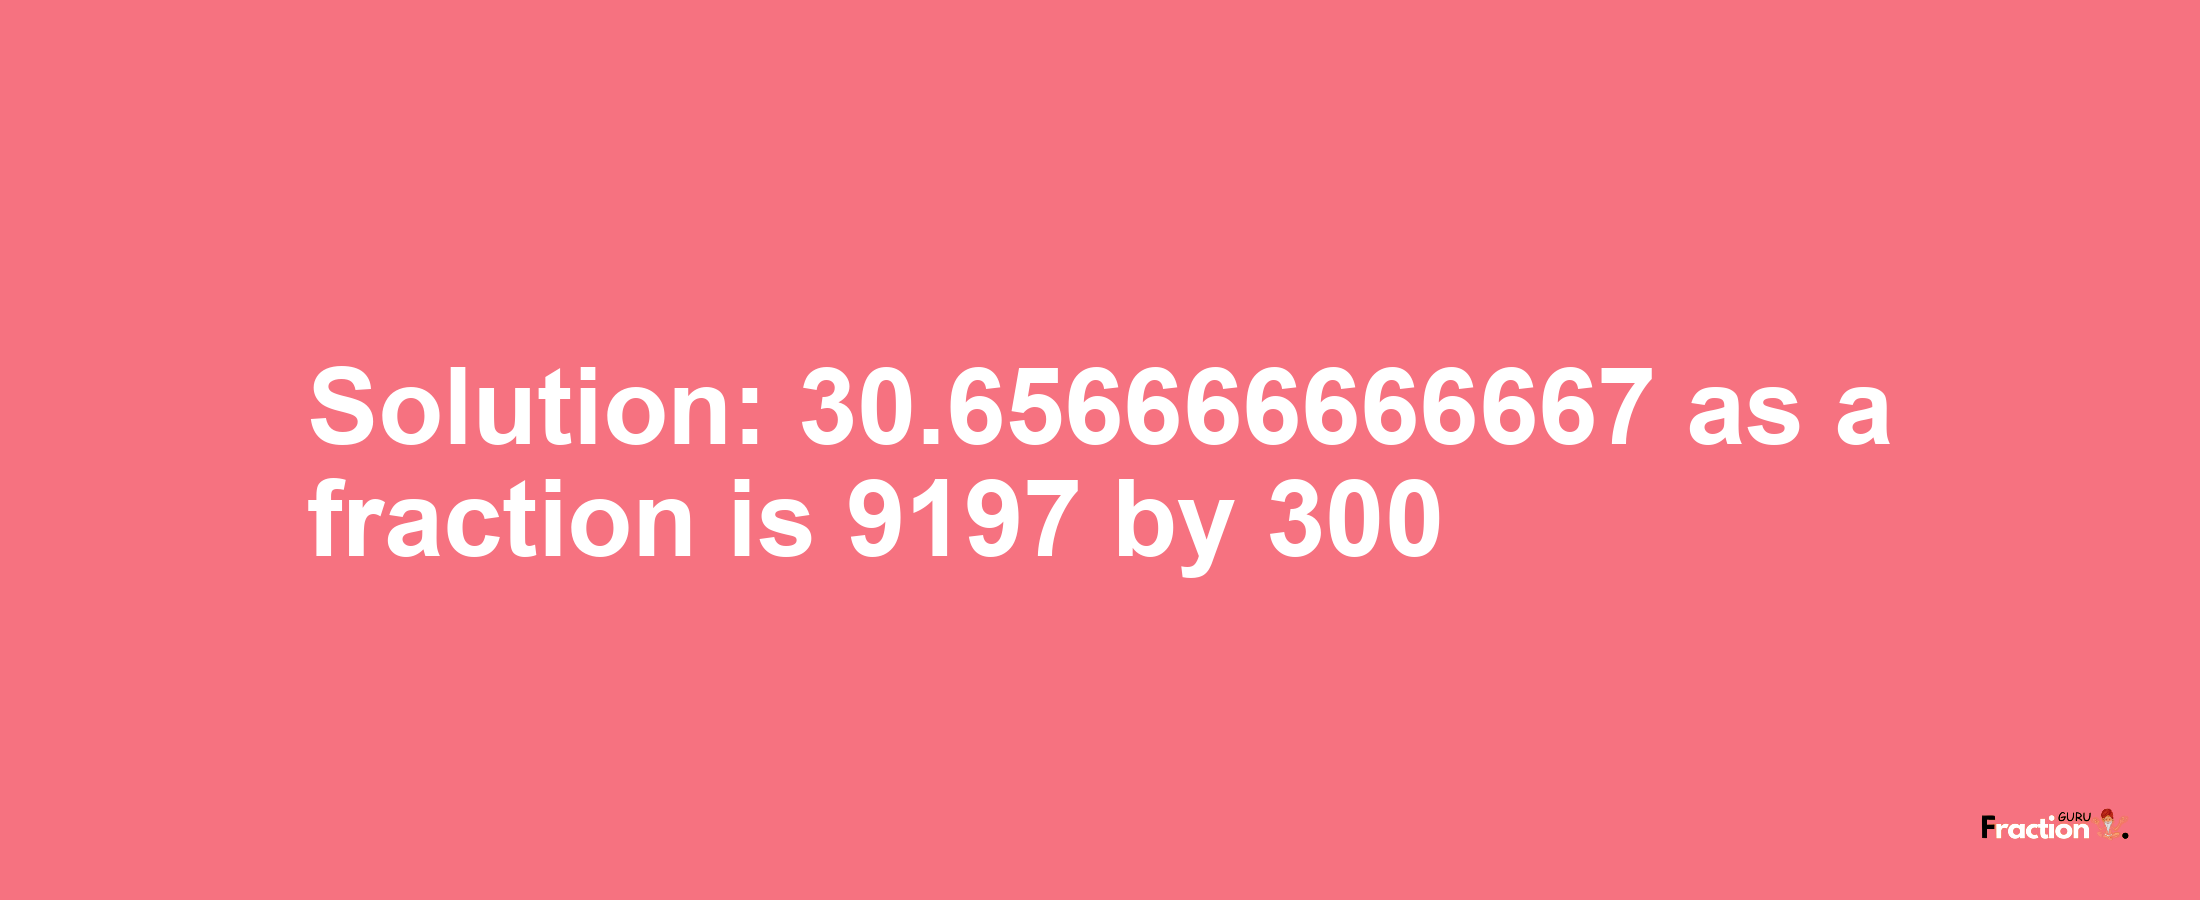 Solution:30.656666666667 as a fraction is 9197/300